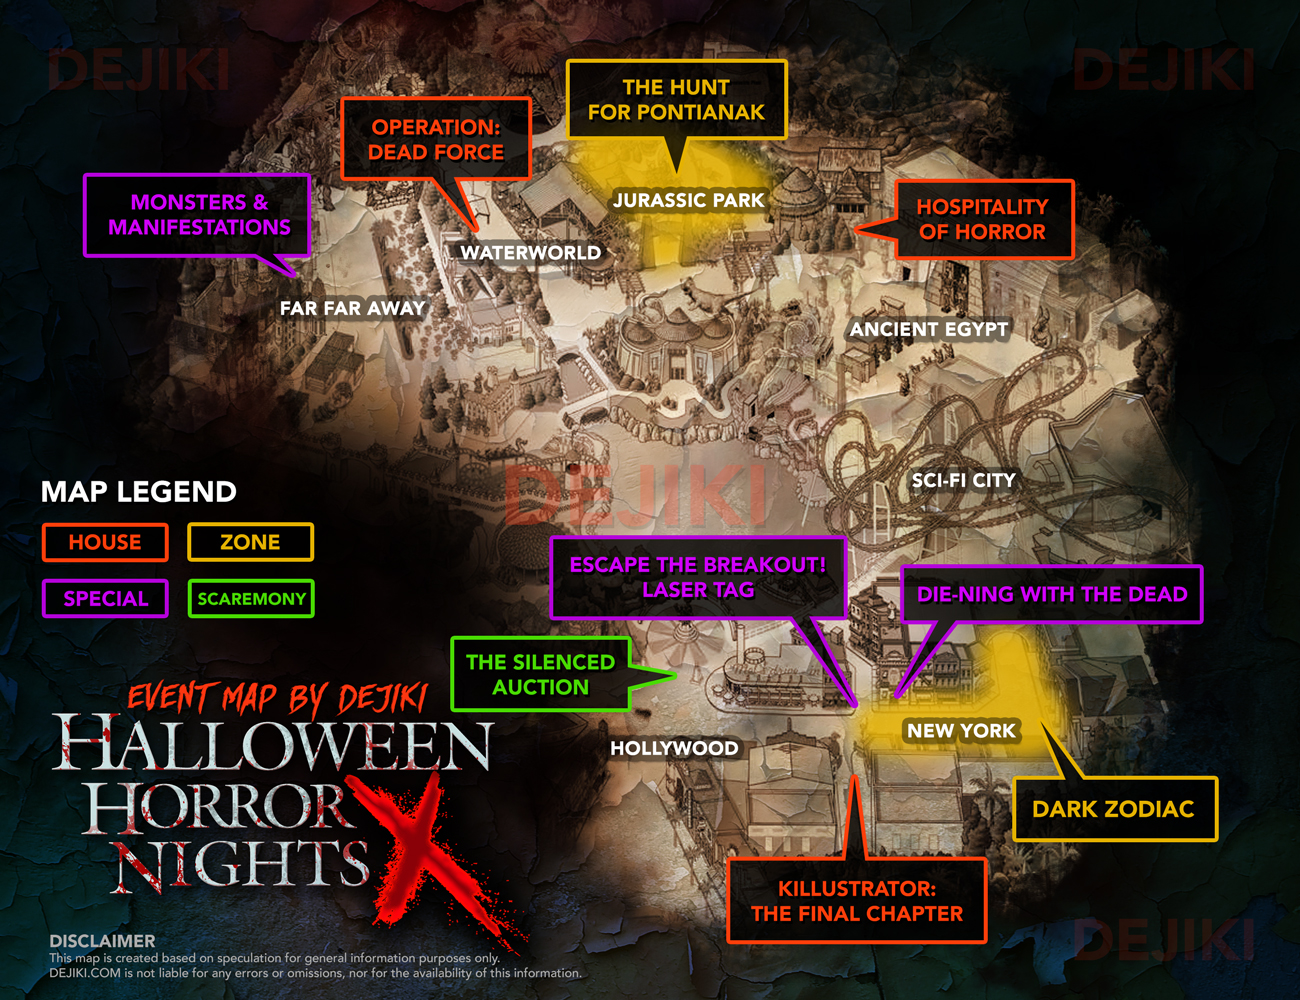 USS Halloween Horror Nights 10 Event Guide + EVENT GUIDE